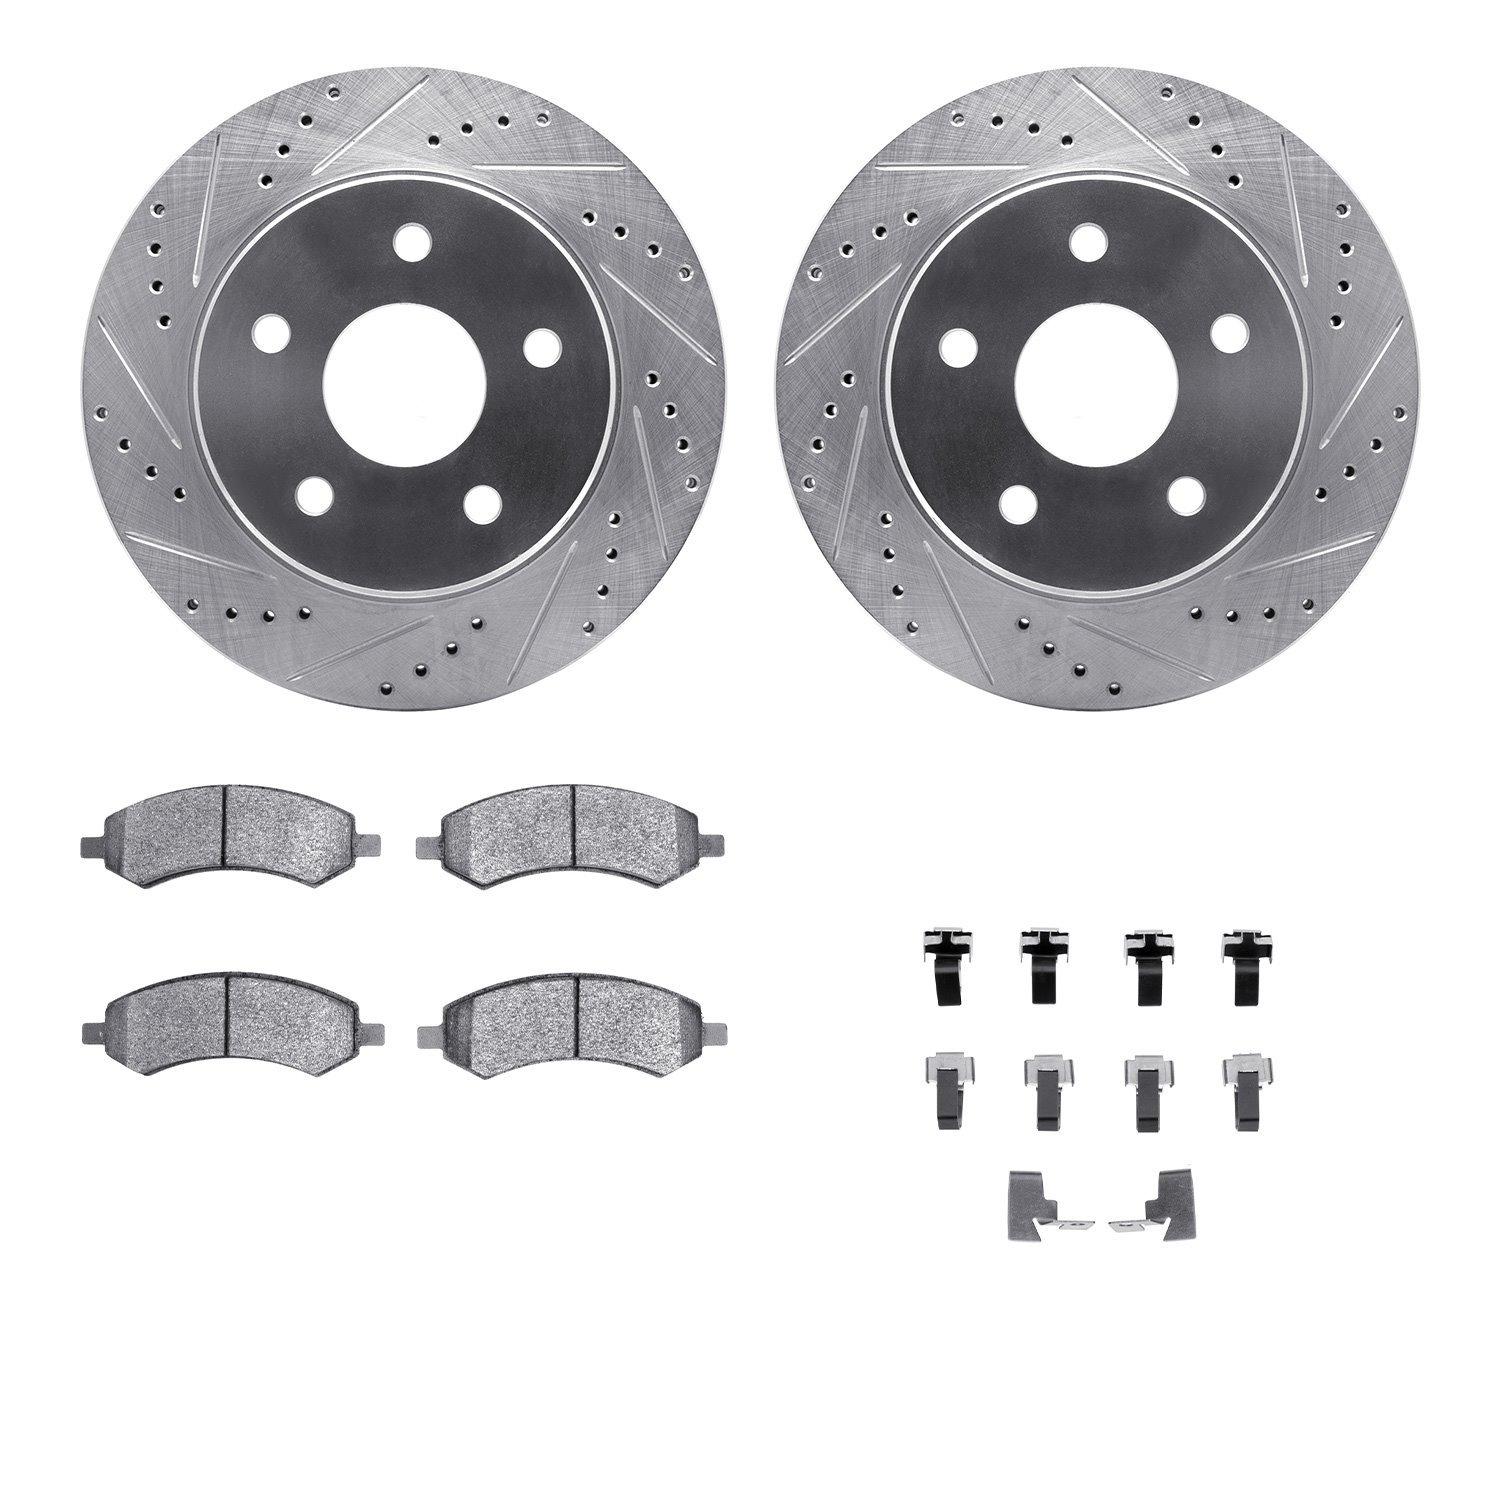 7412-40010 Drilled/Slotted Brake Rotors with Ultimate-Duty Brake Pads Kit & Hardware [Silver], 2006-2018 Mopar, Position: Front